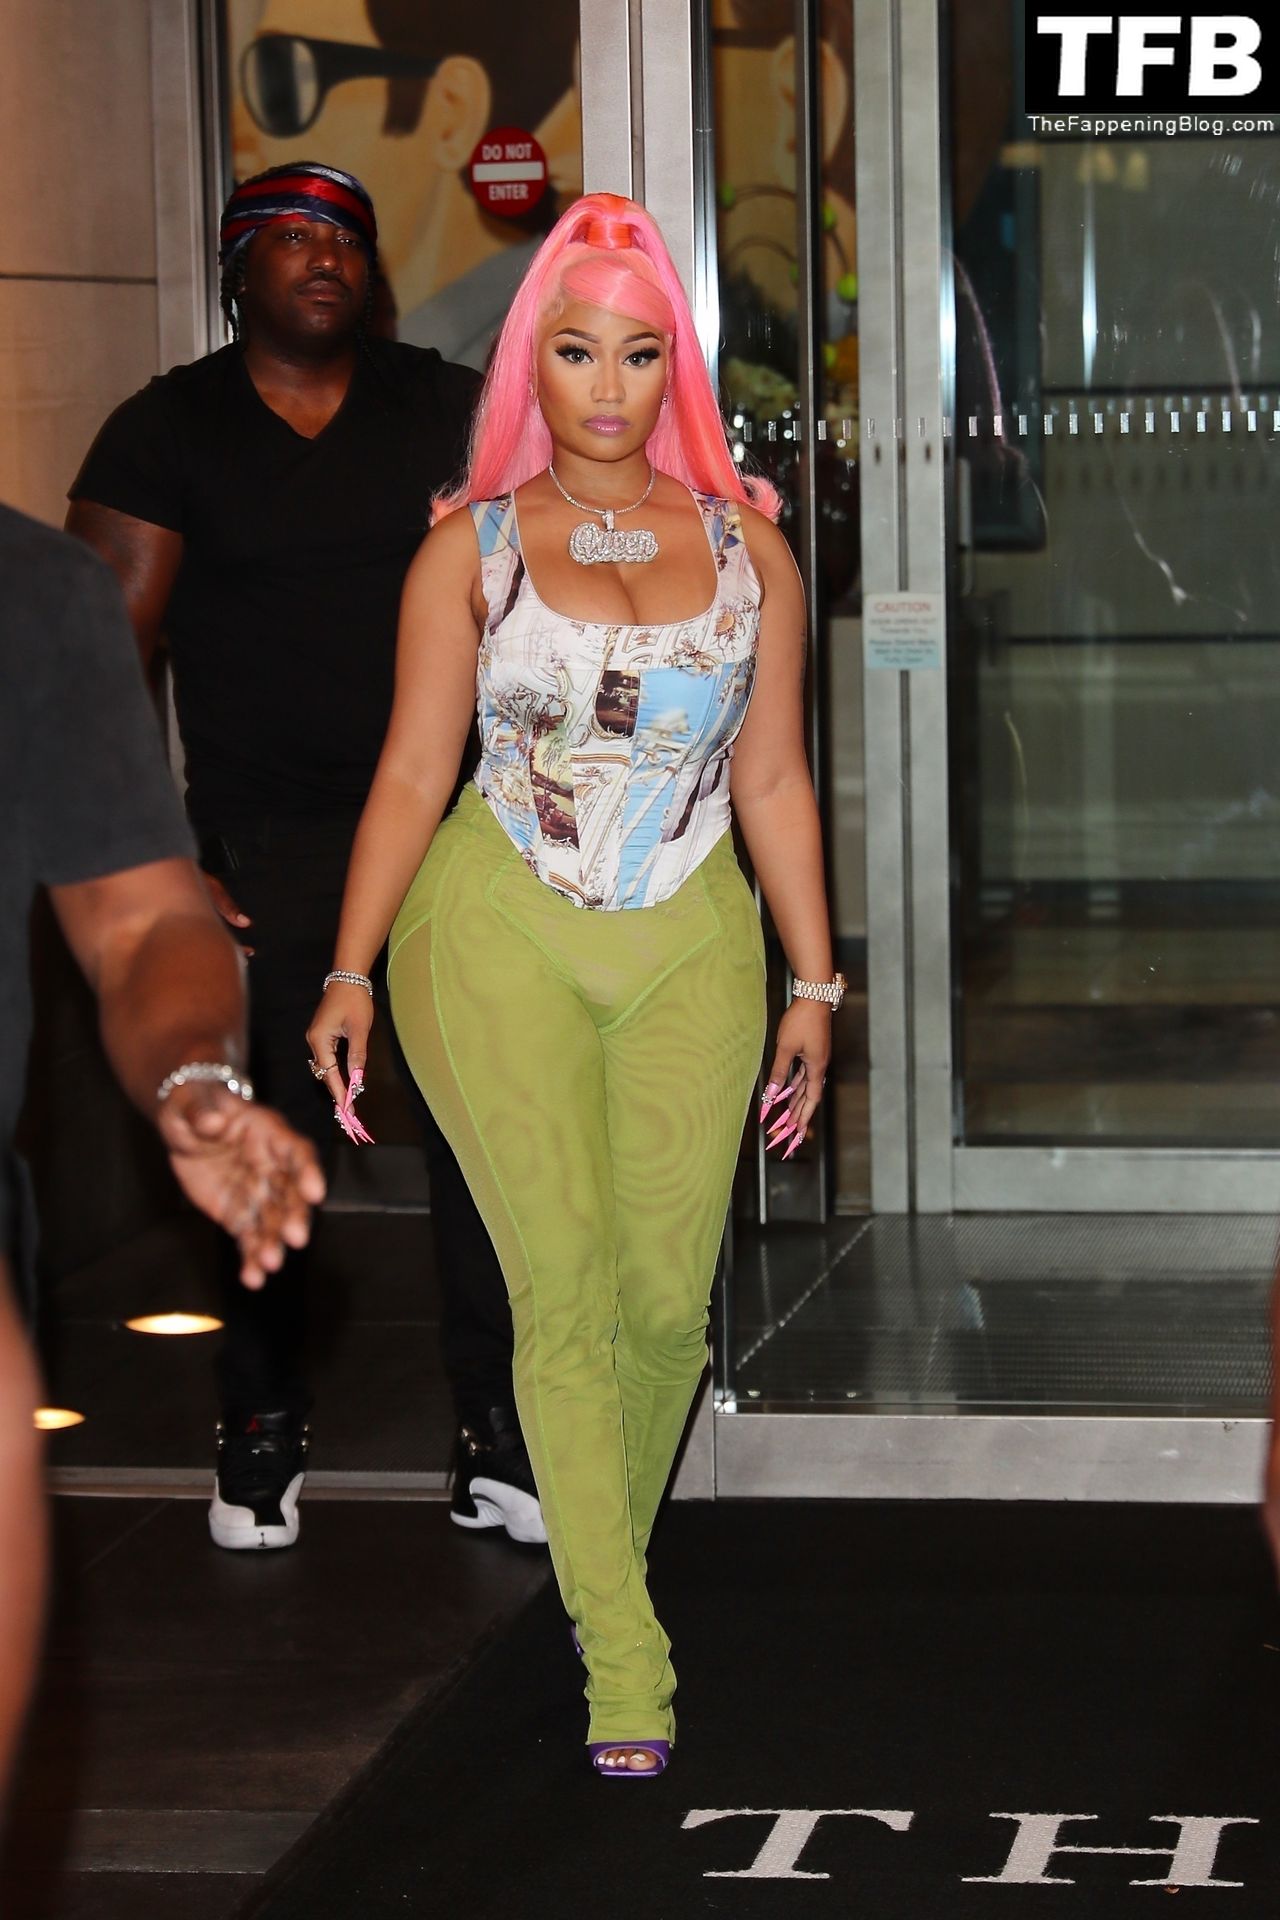 Nicki Minaj Sexy The Fappening Blog 29 - Nicki Minaj Checks Out of Her Hotel After Her Epic Night at the MTV VMA’s in NYC (38 Photos)